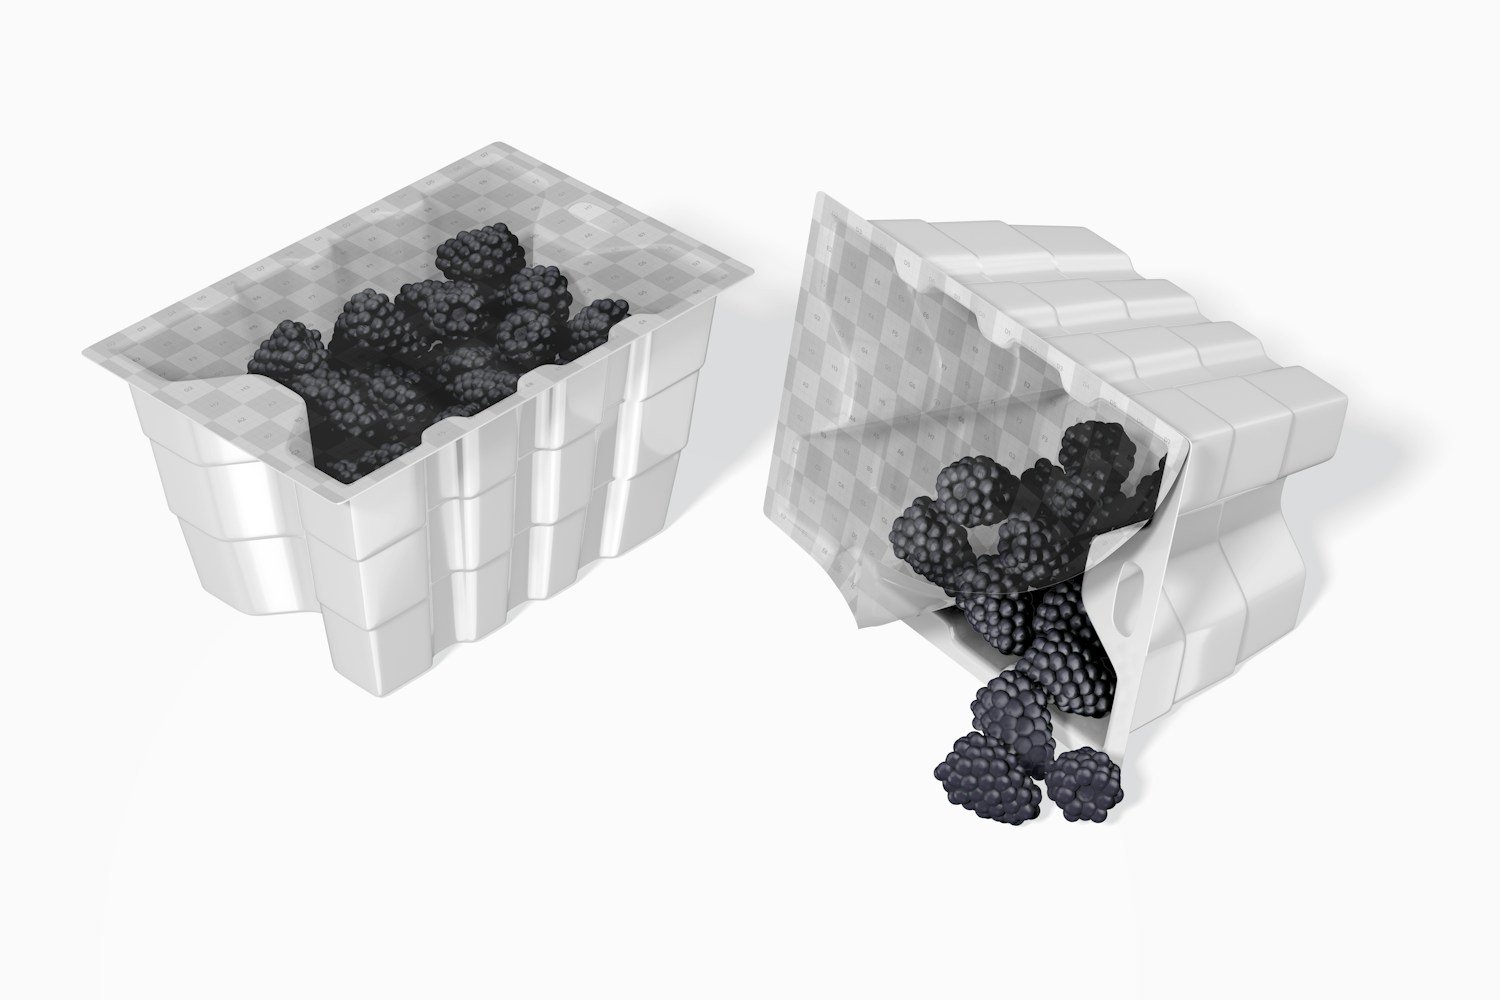 Plastic Fruit Boxes Mockup, Standing and Dropped